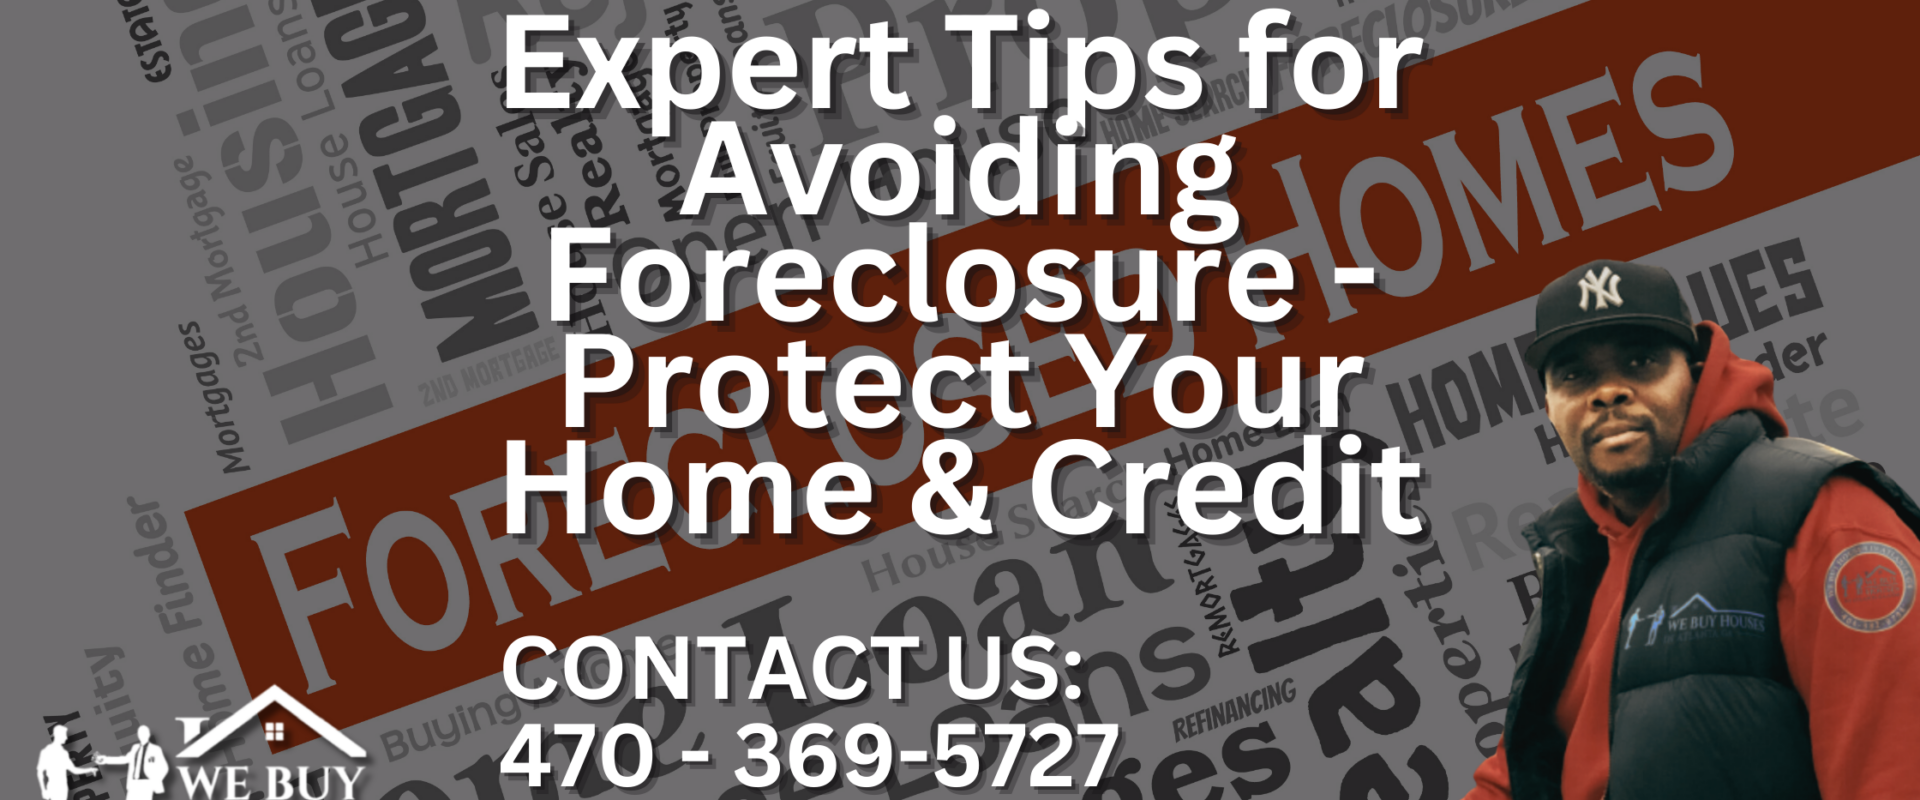 Expert Tips for Avoiding Foreclosure - Protect Your Home & Credit